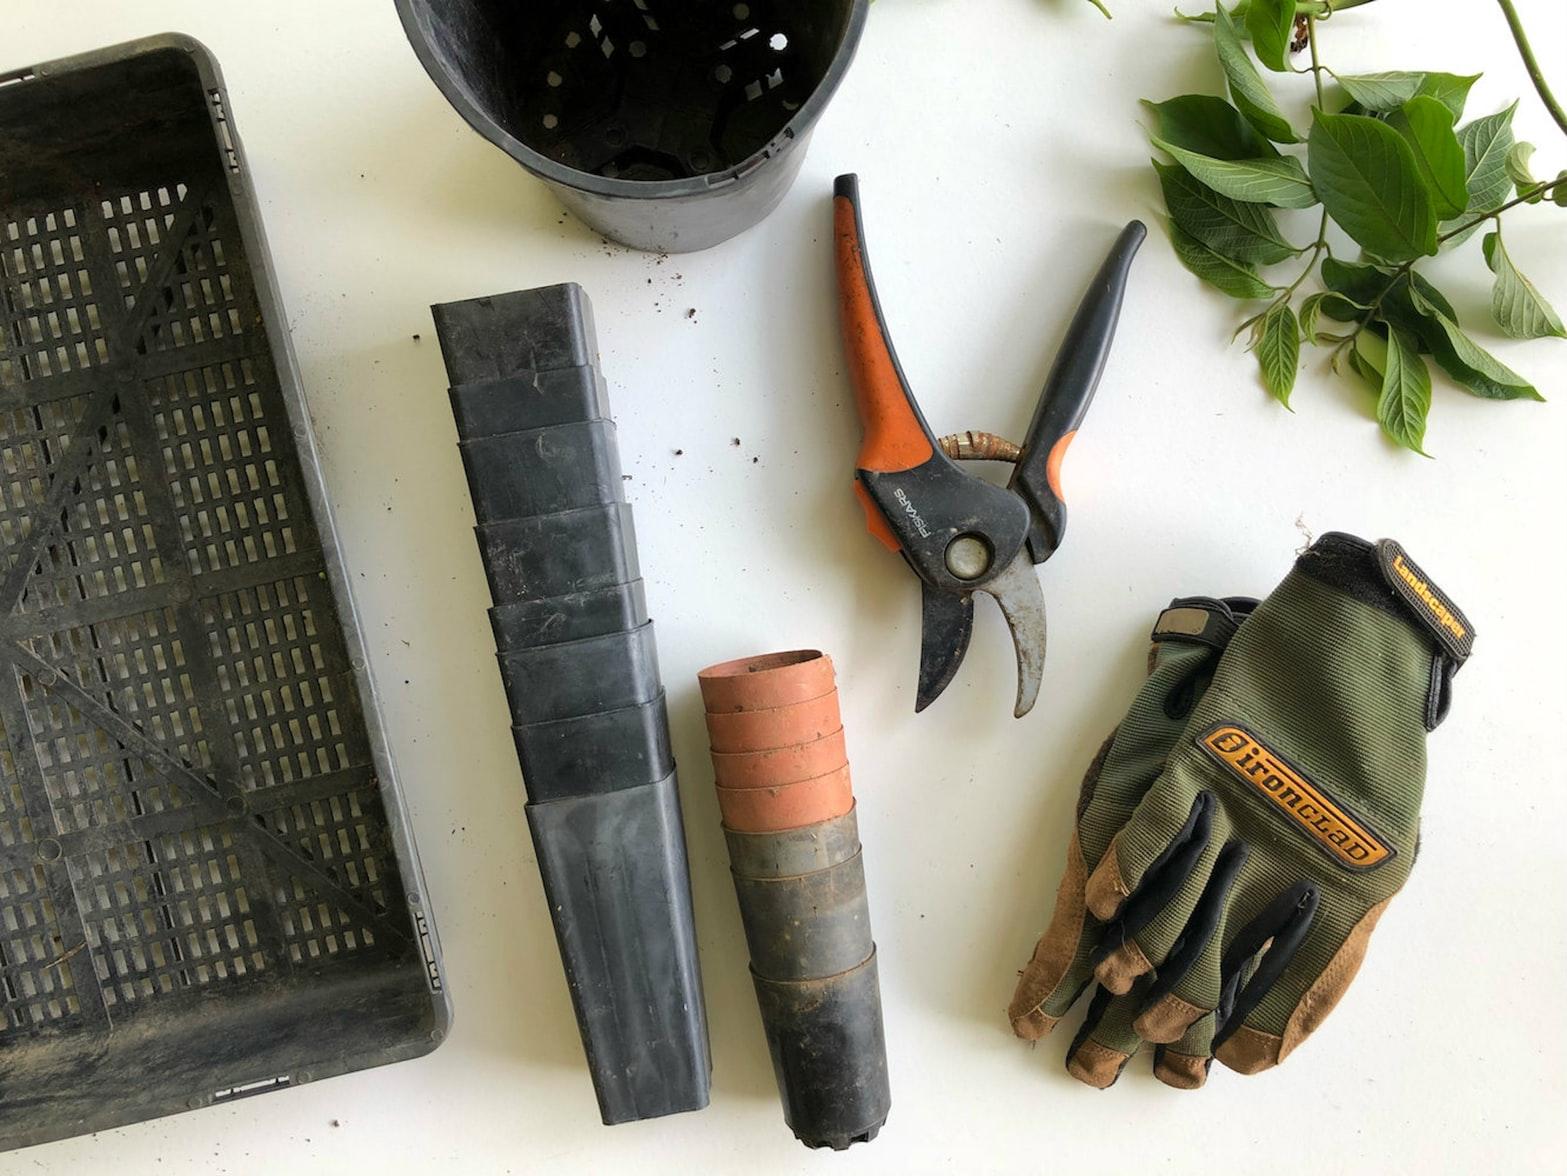 How to Care for Your Gardening Tools